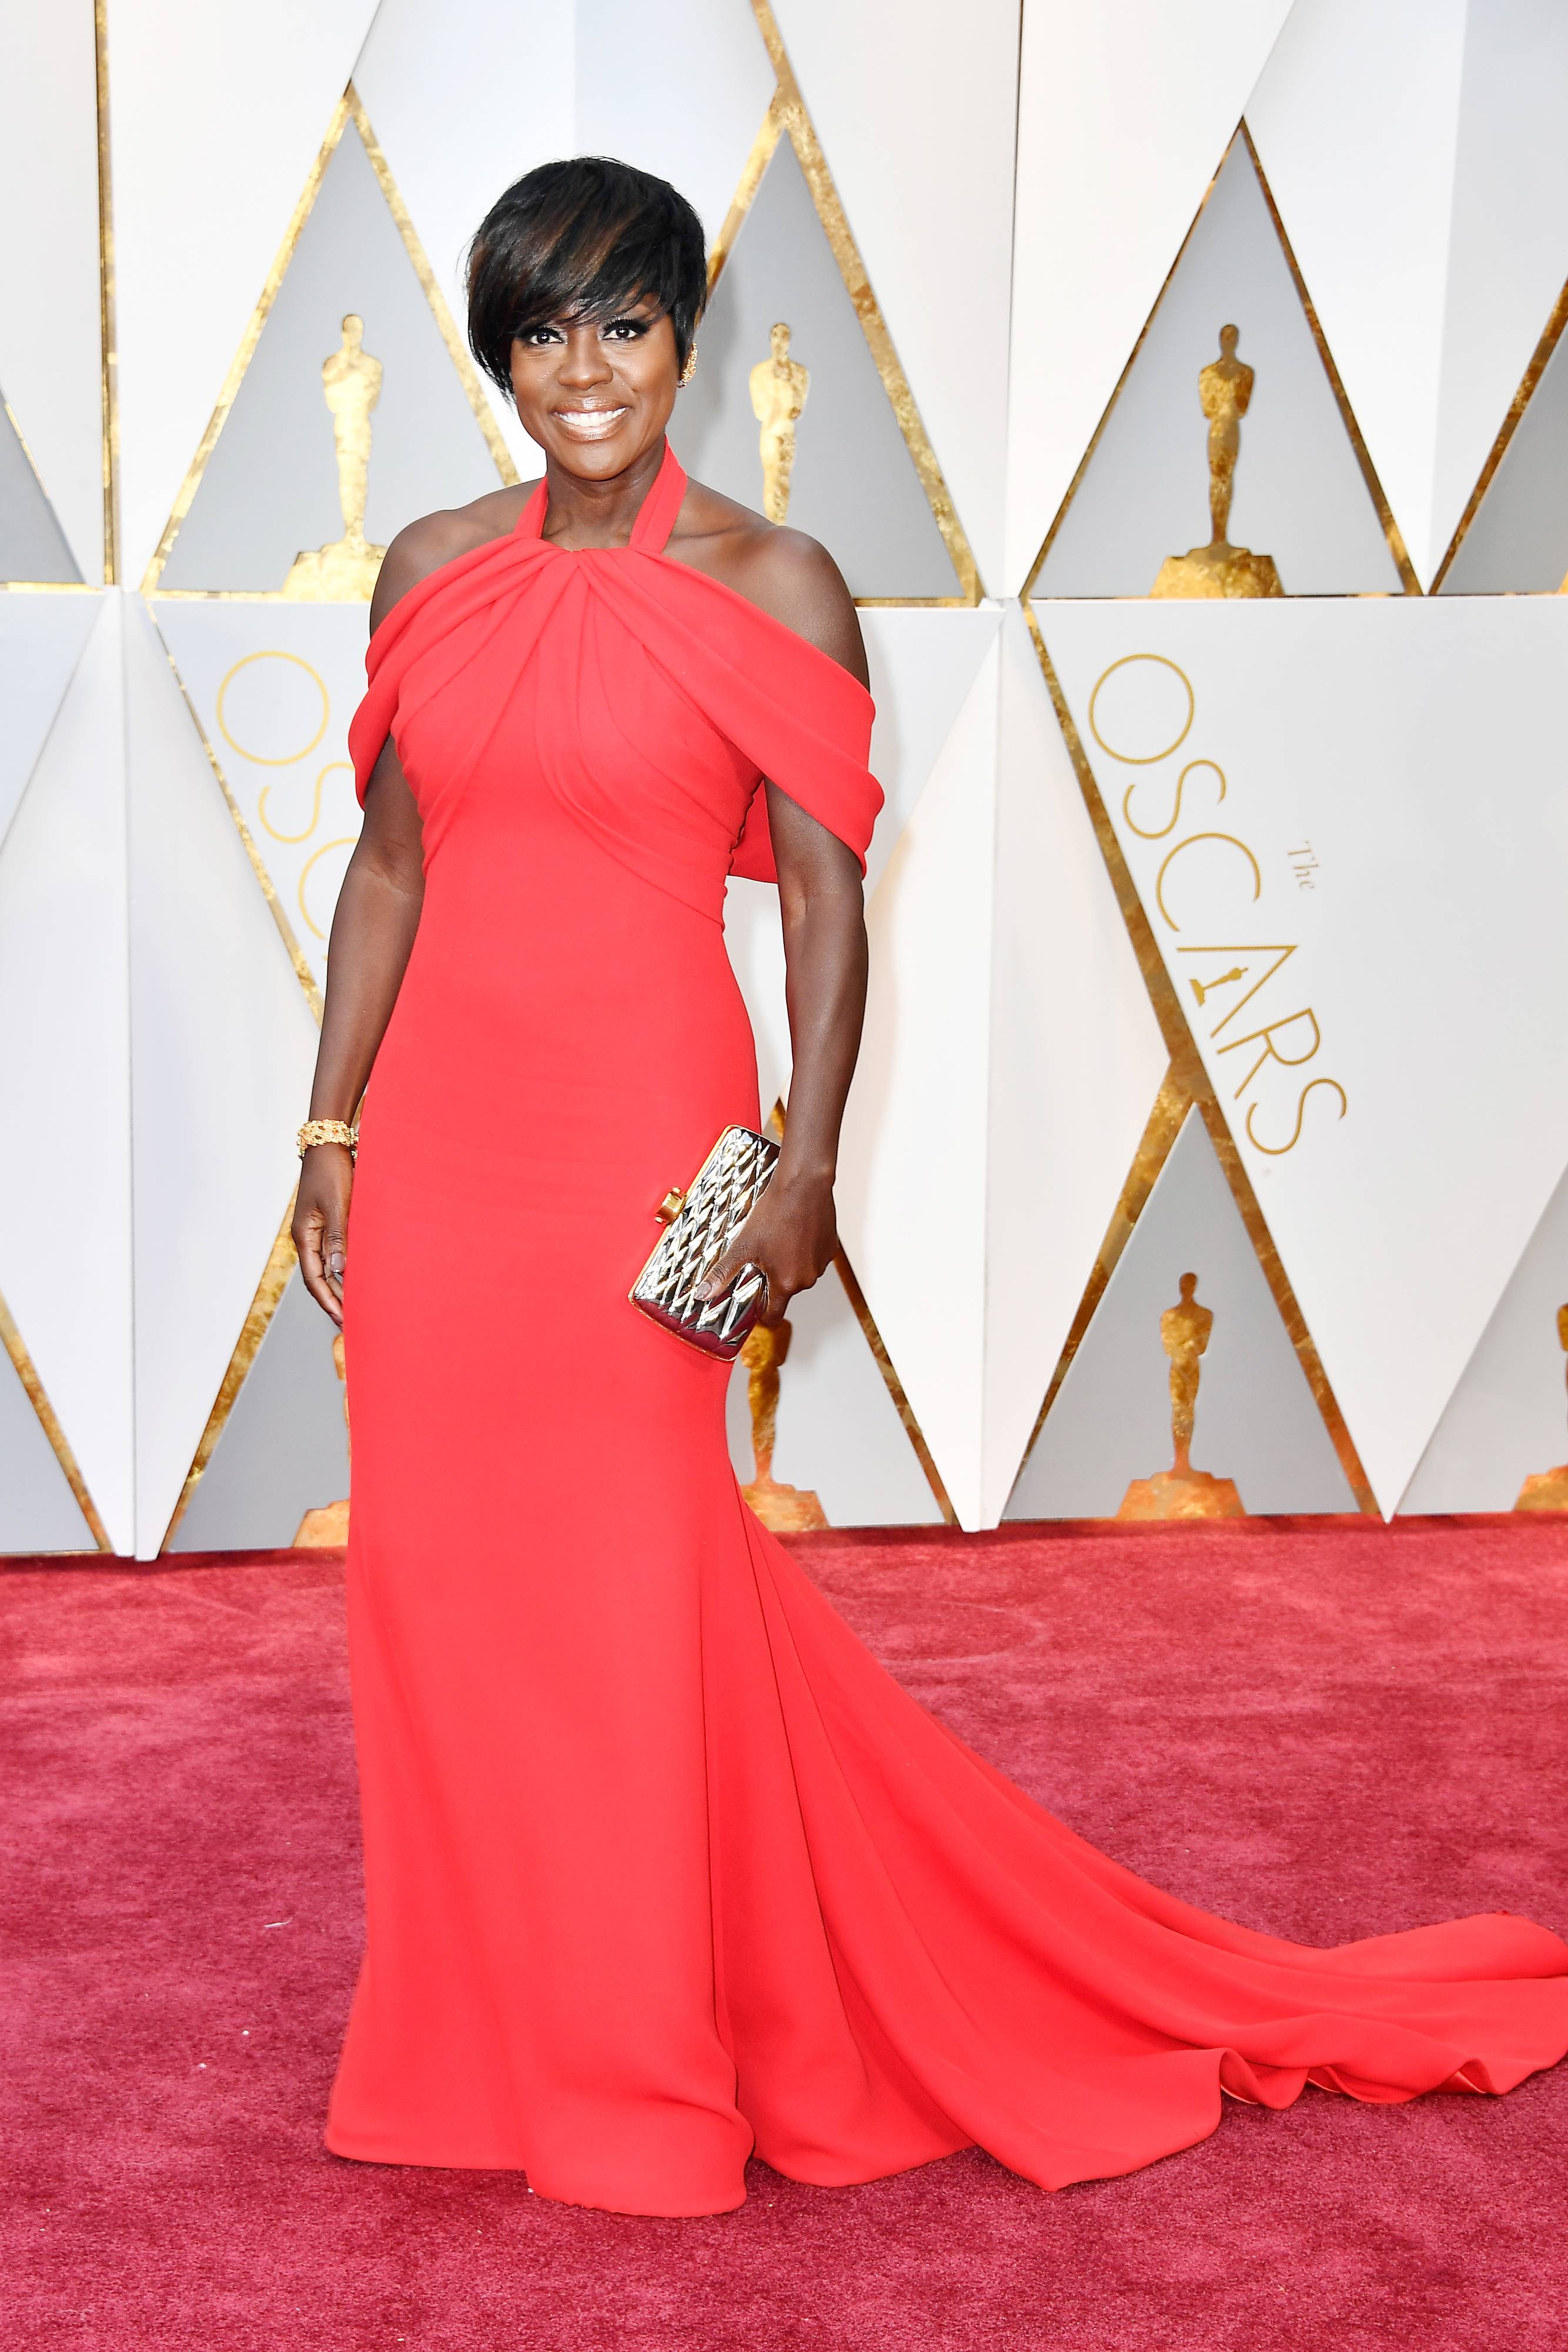 &nbsp;HOLLYWOOD, CA - FEBRUARY 26: Actor Viola Davis attends the 89th Annual Academy Awards at Hollywood &amp; Highland Center on February 26, 2017 in Hollywood, California. (Photo: Frazer Harrison/Getty Images)&nbsp;